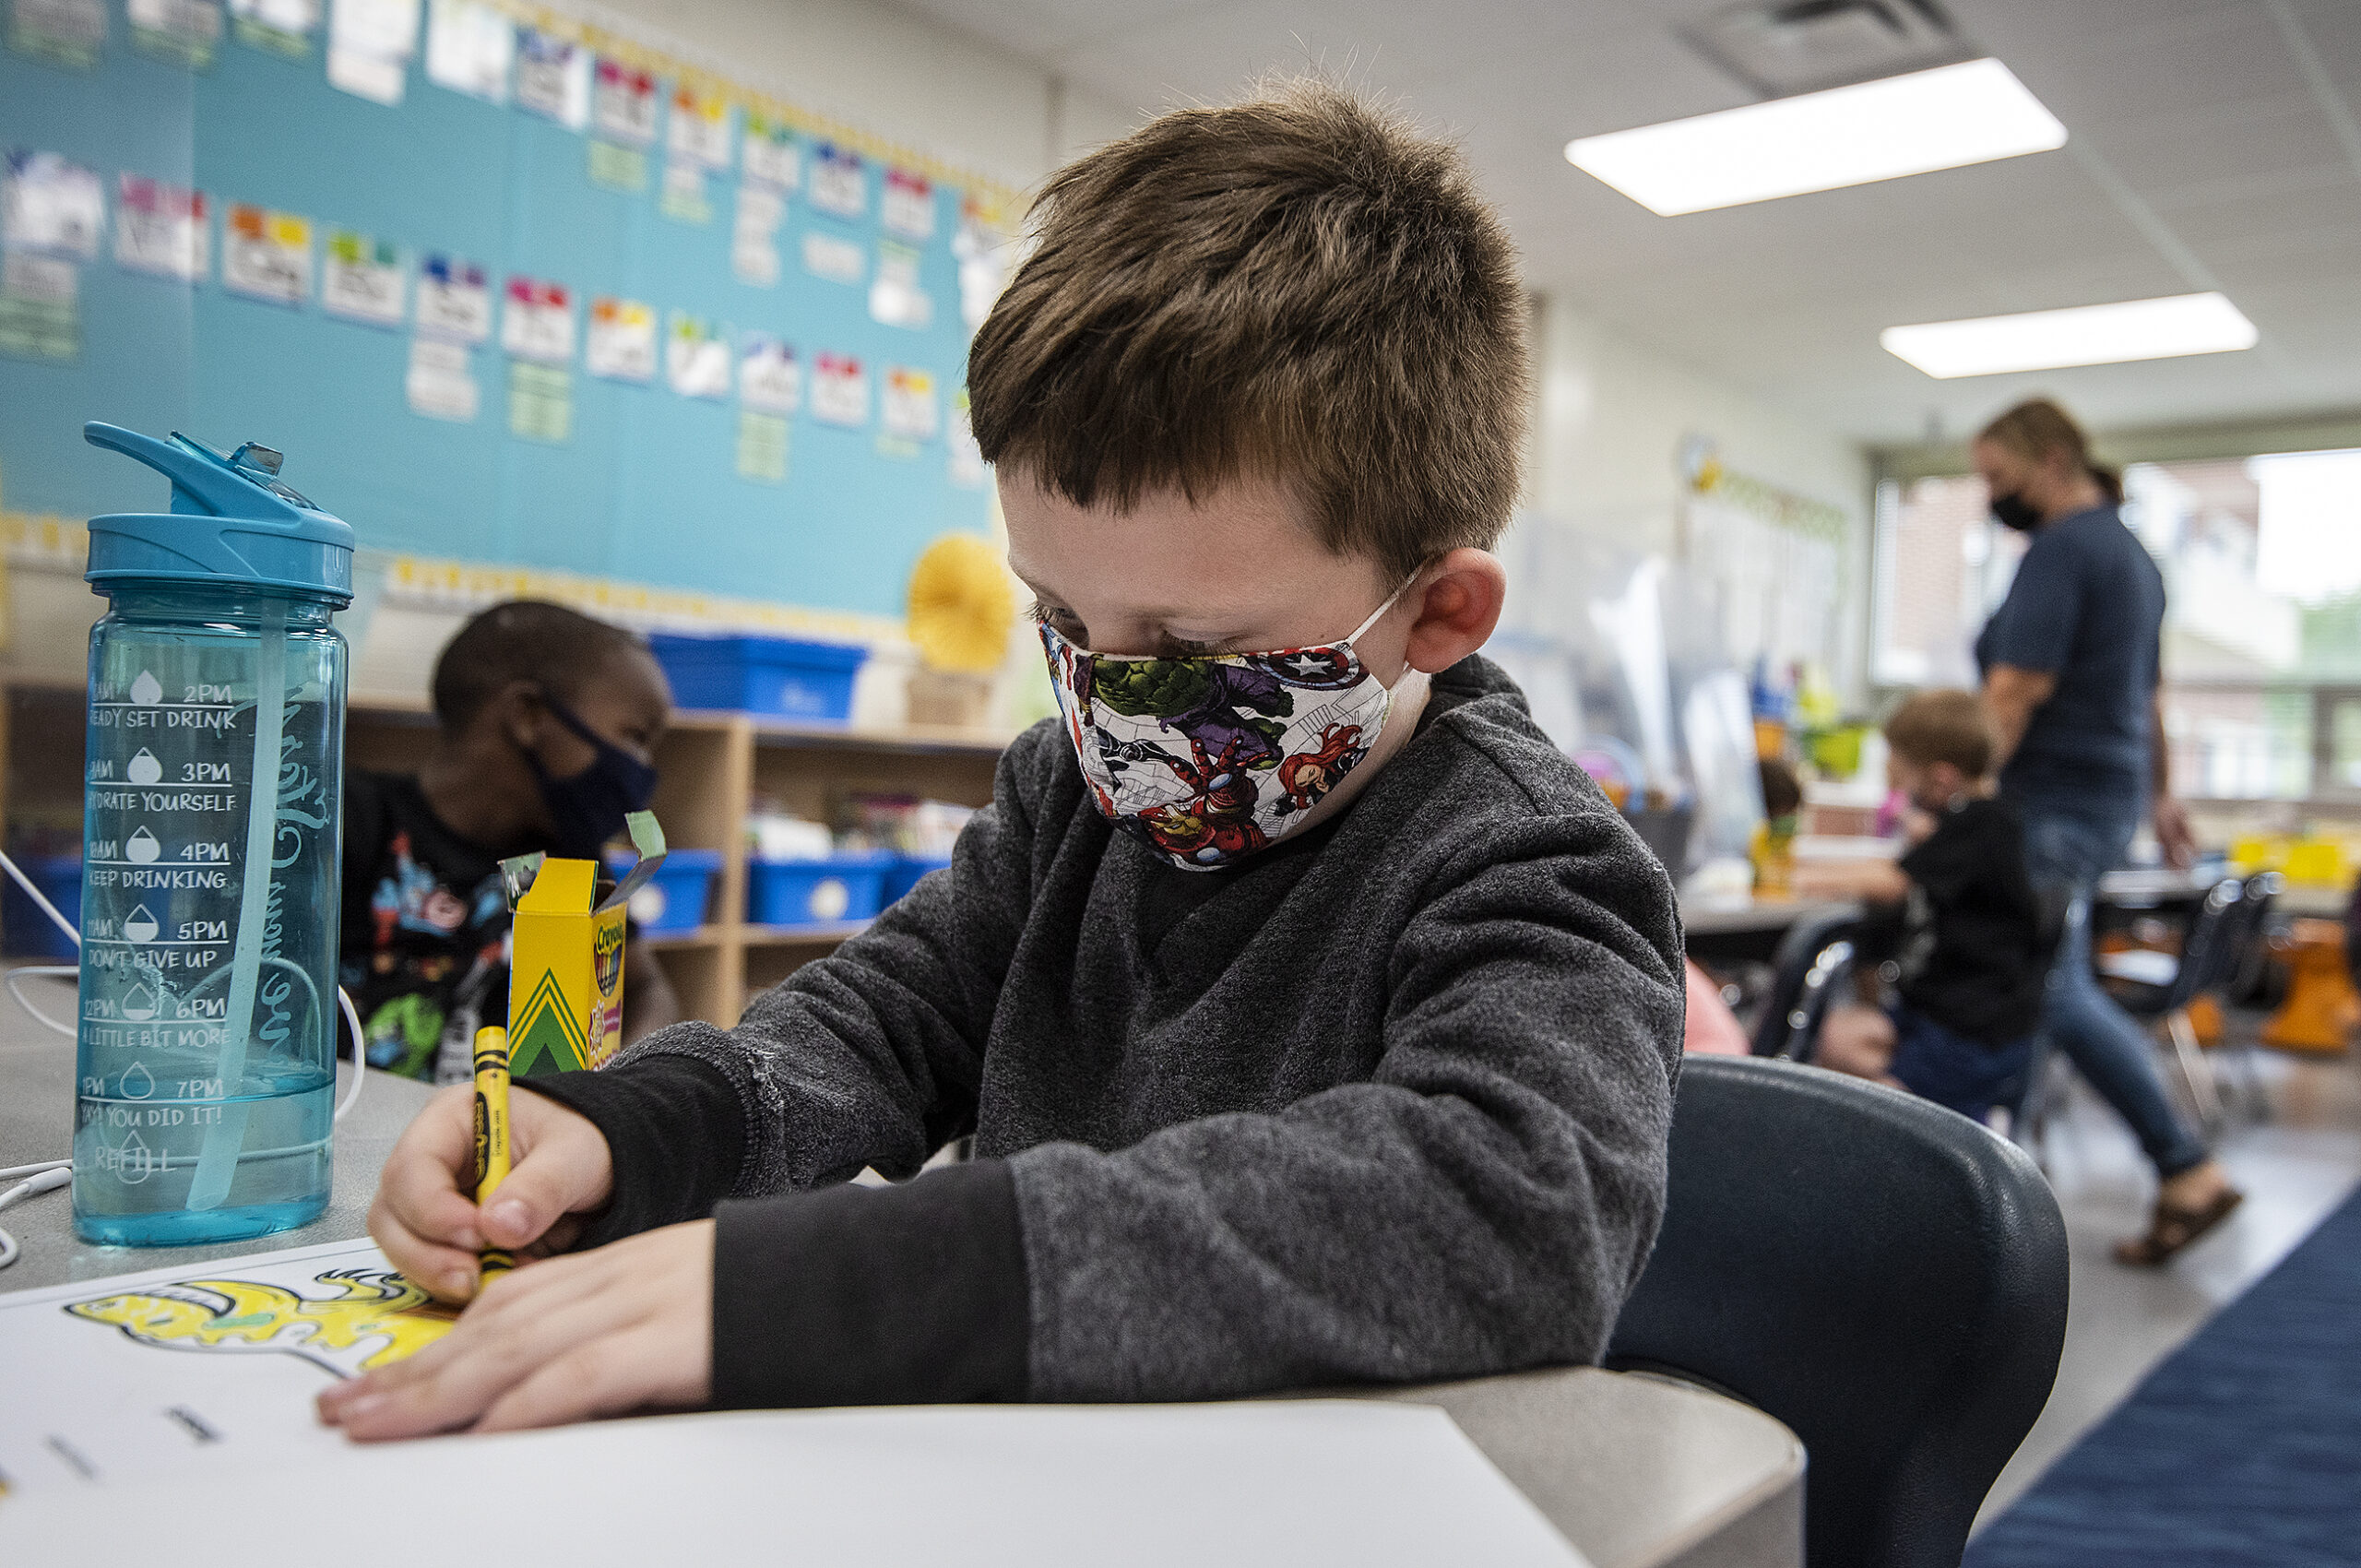 New CDC quarantine guidance will let kids, staff return to school after 5 days. Wisconsin parents say they’re still confused.